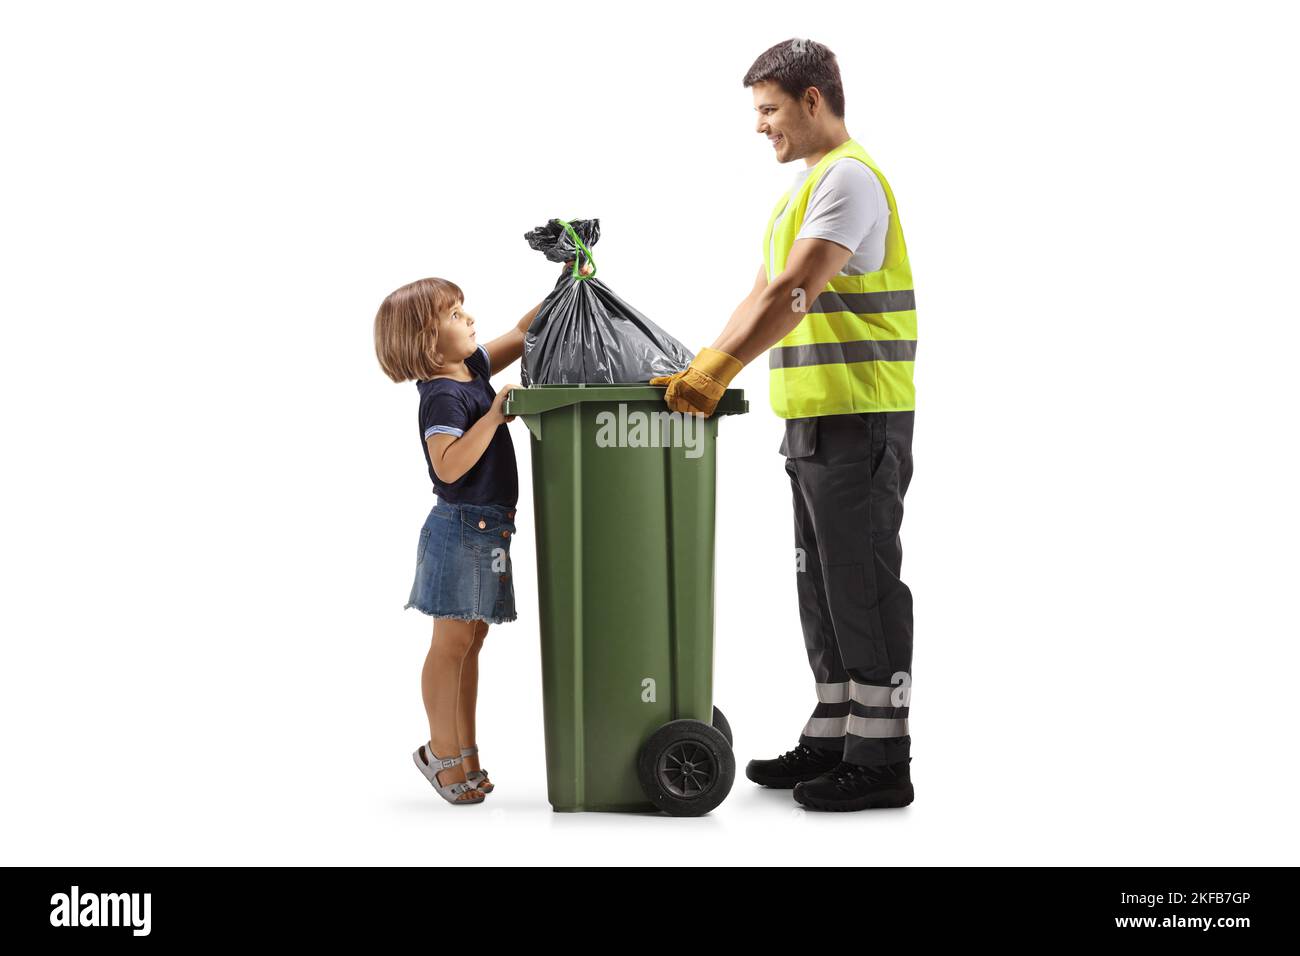 Waste collector holding a green dustbin and a child throwing a bag isolated on white background Stock Photo